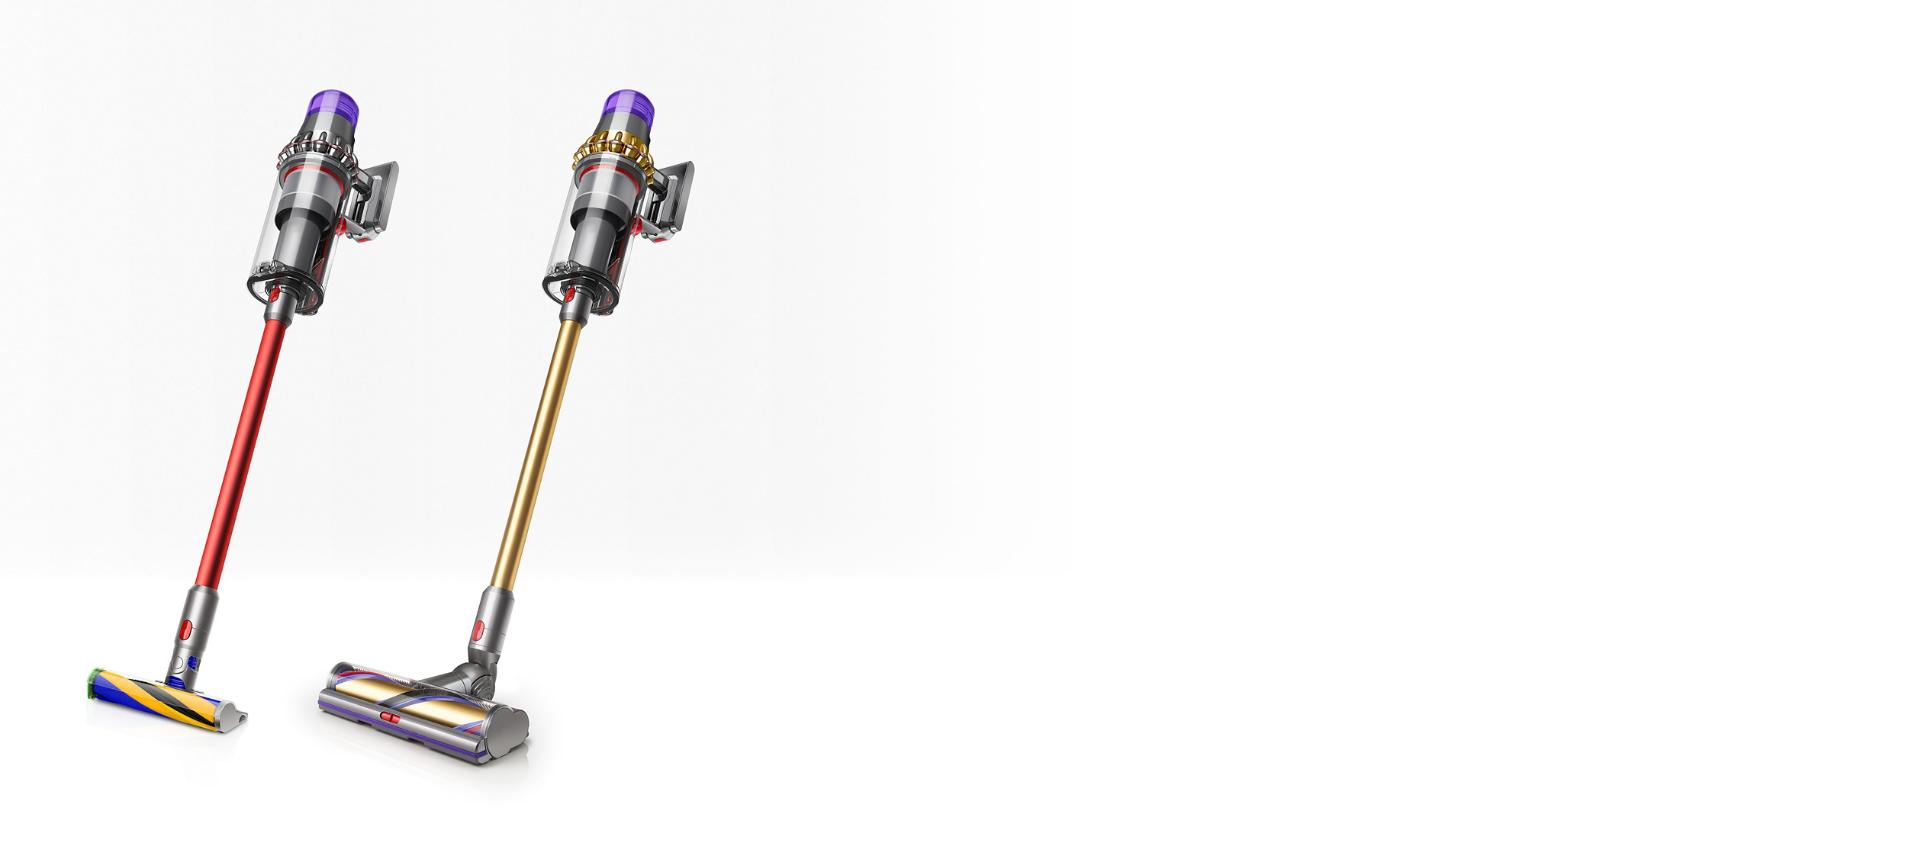 The Dyson V11 absolute and Dyson Outsize vacuum side by side